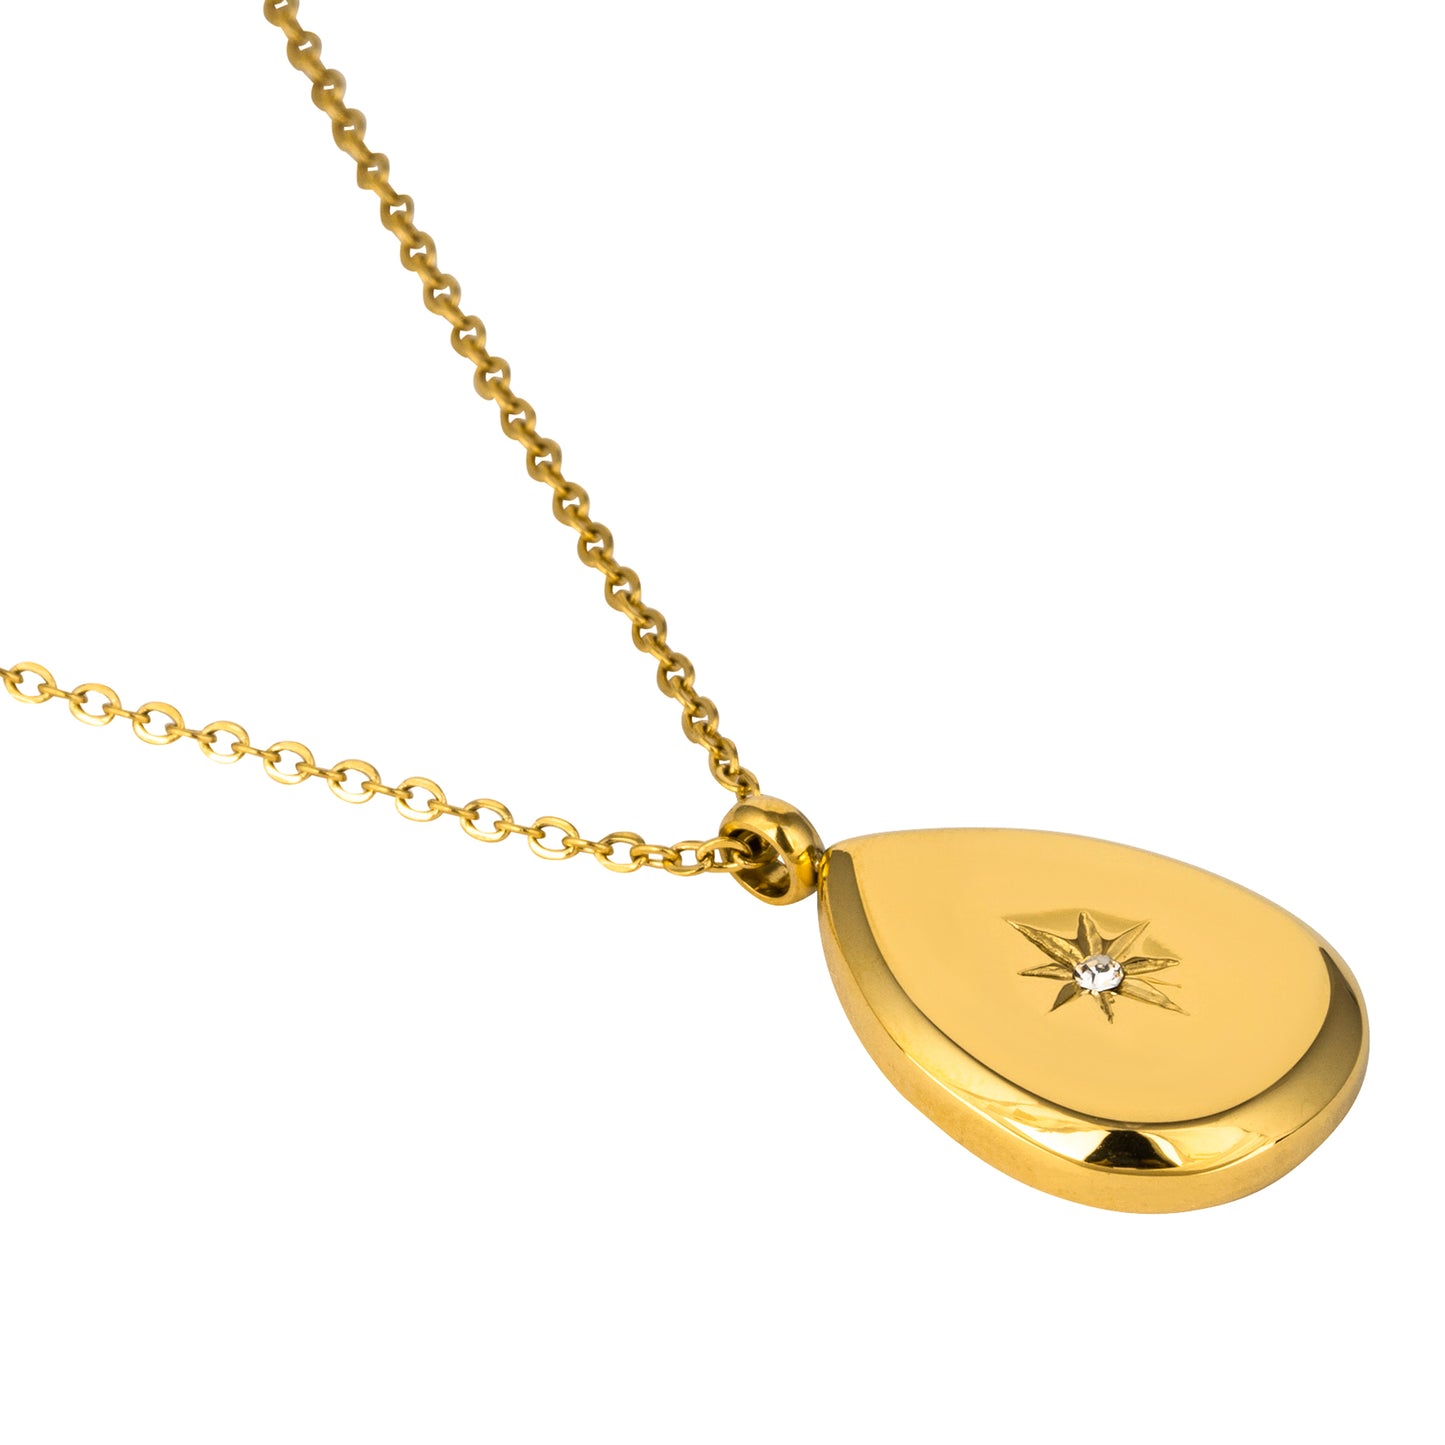 Drop Shape Pendant with a Star